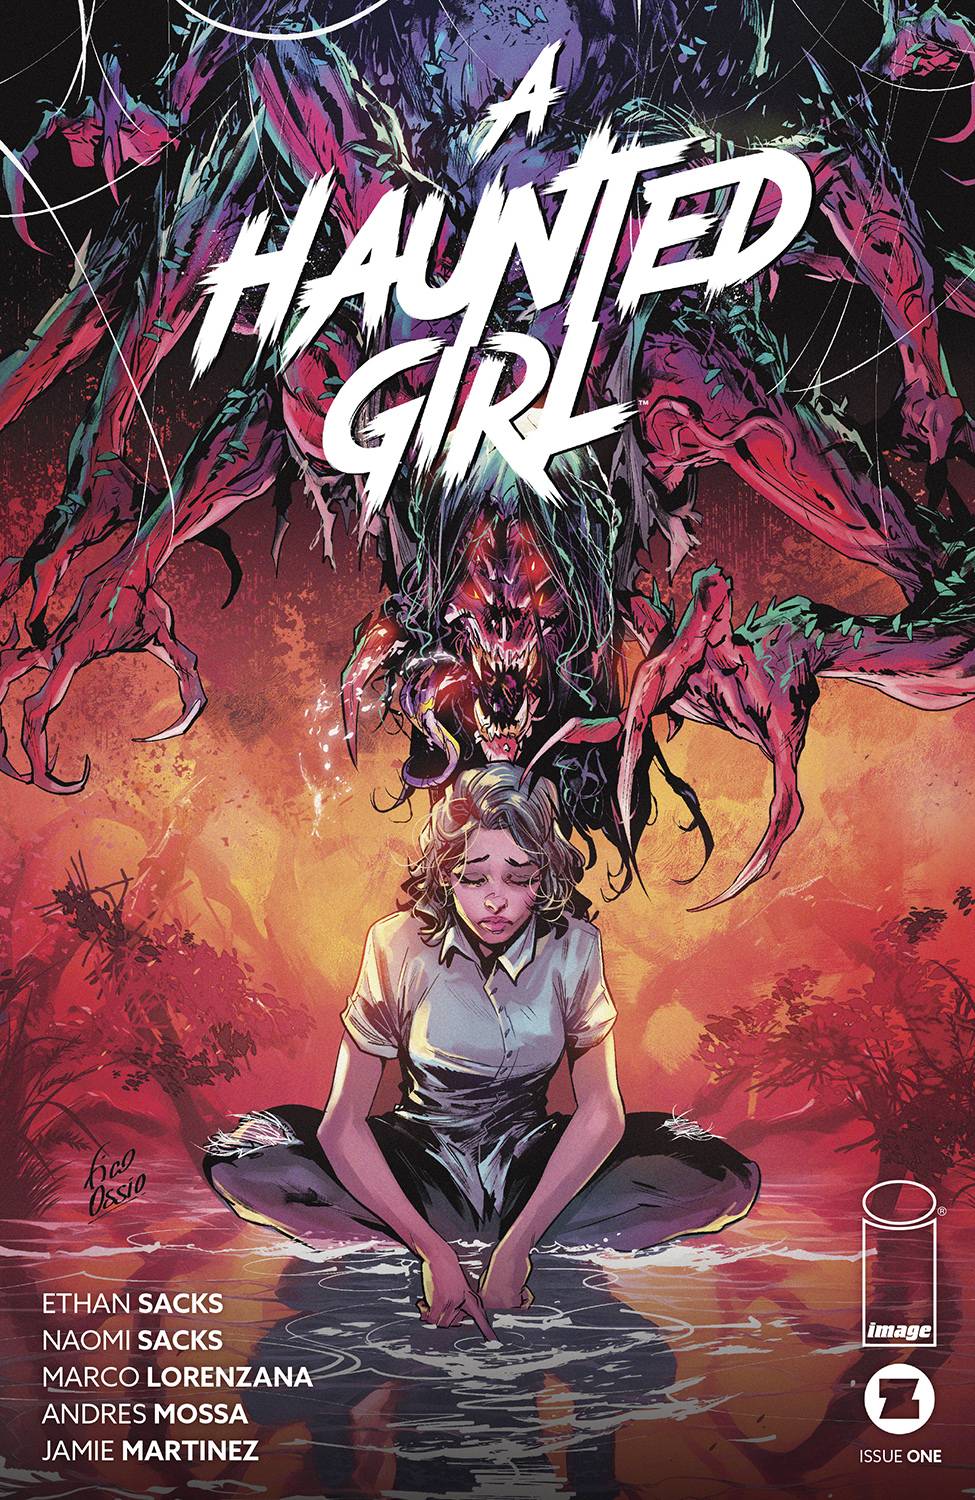 A HAUNTED GIRL #1 (OF 4) CVR B OSSIO [SIGNED BY ETHAN SACKS]